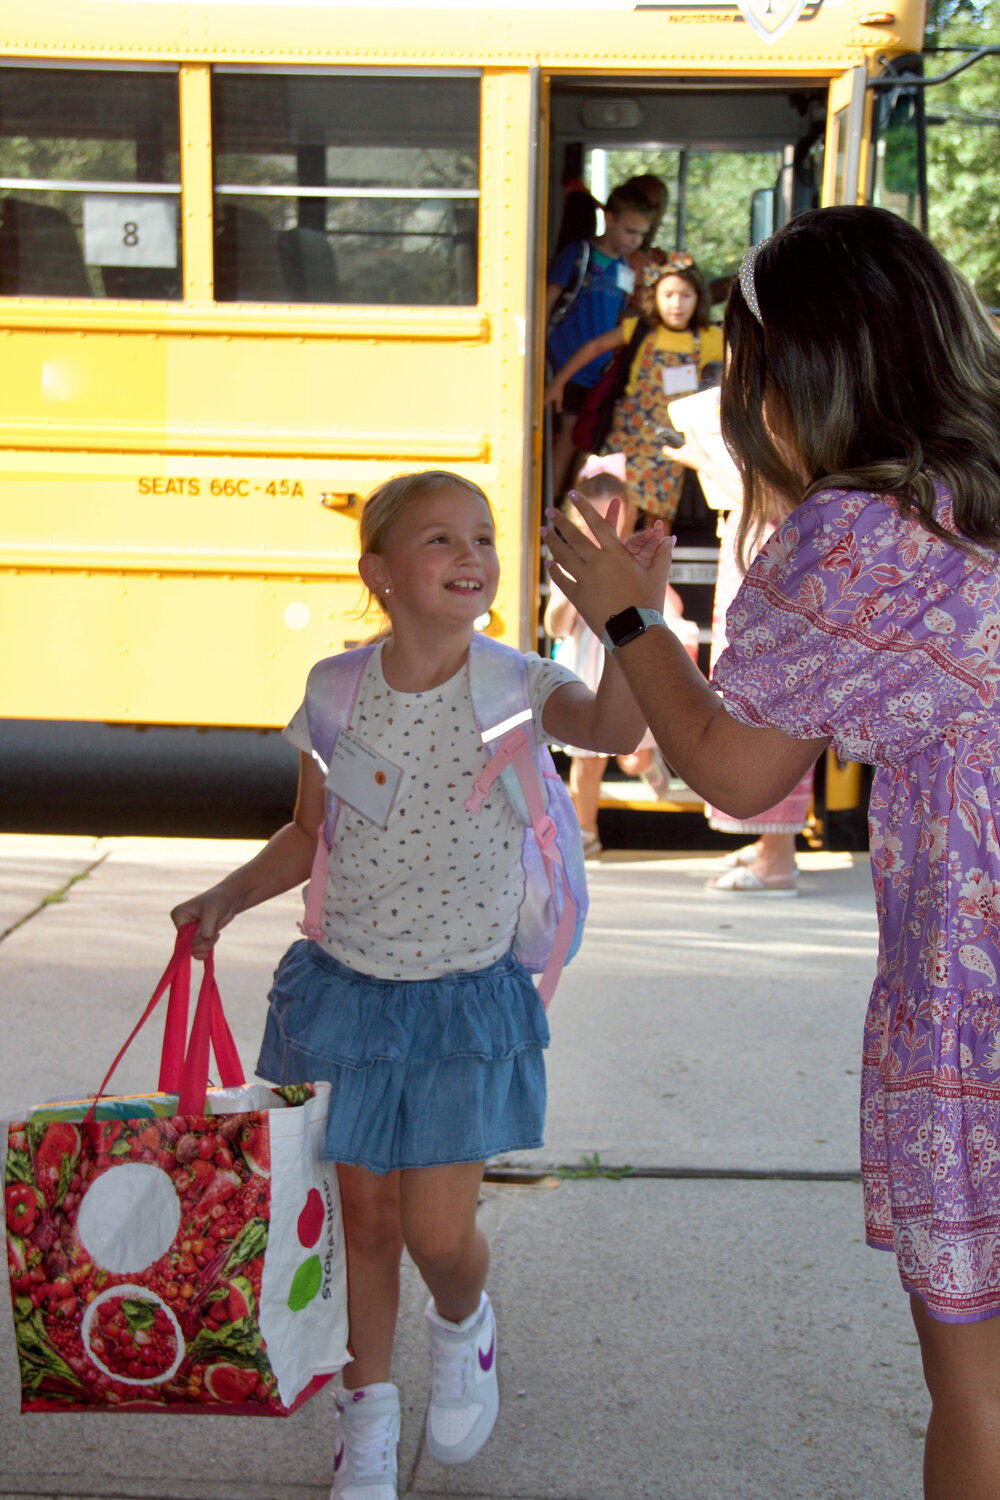 Getting a high five was a great way to start the new school year.